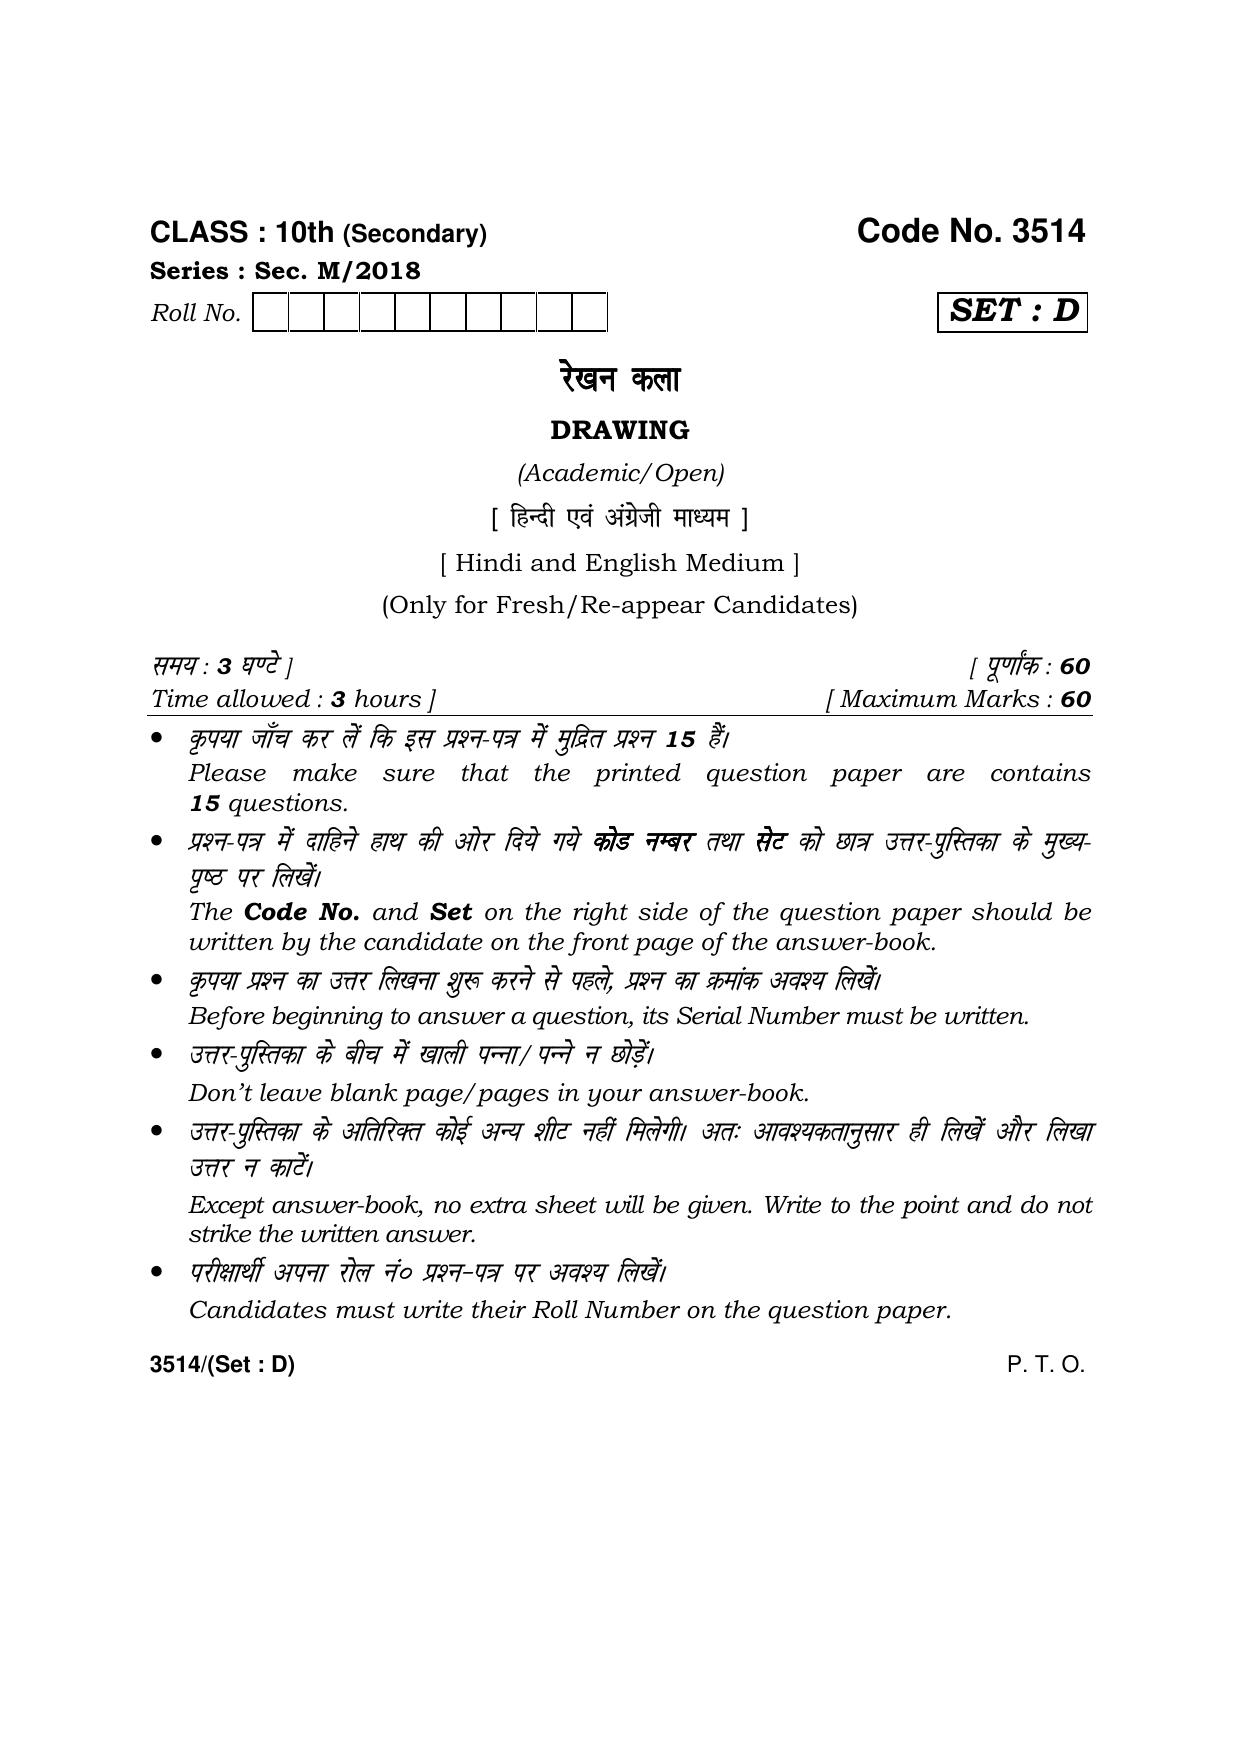 Haryana Board HBSE Class 10 Drawing -D 2018 Question Paper - Page 1